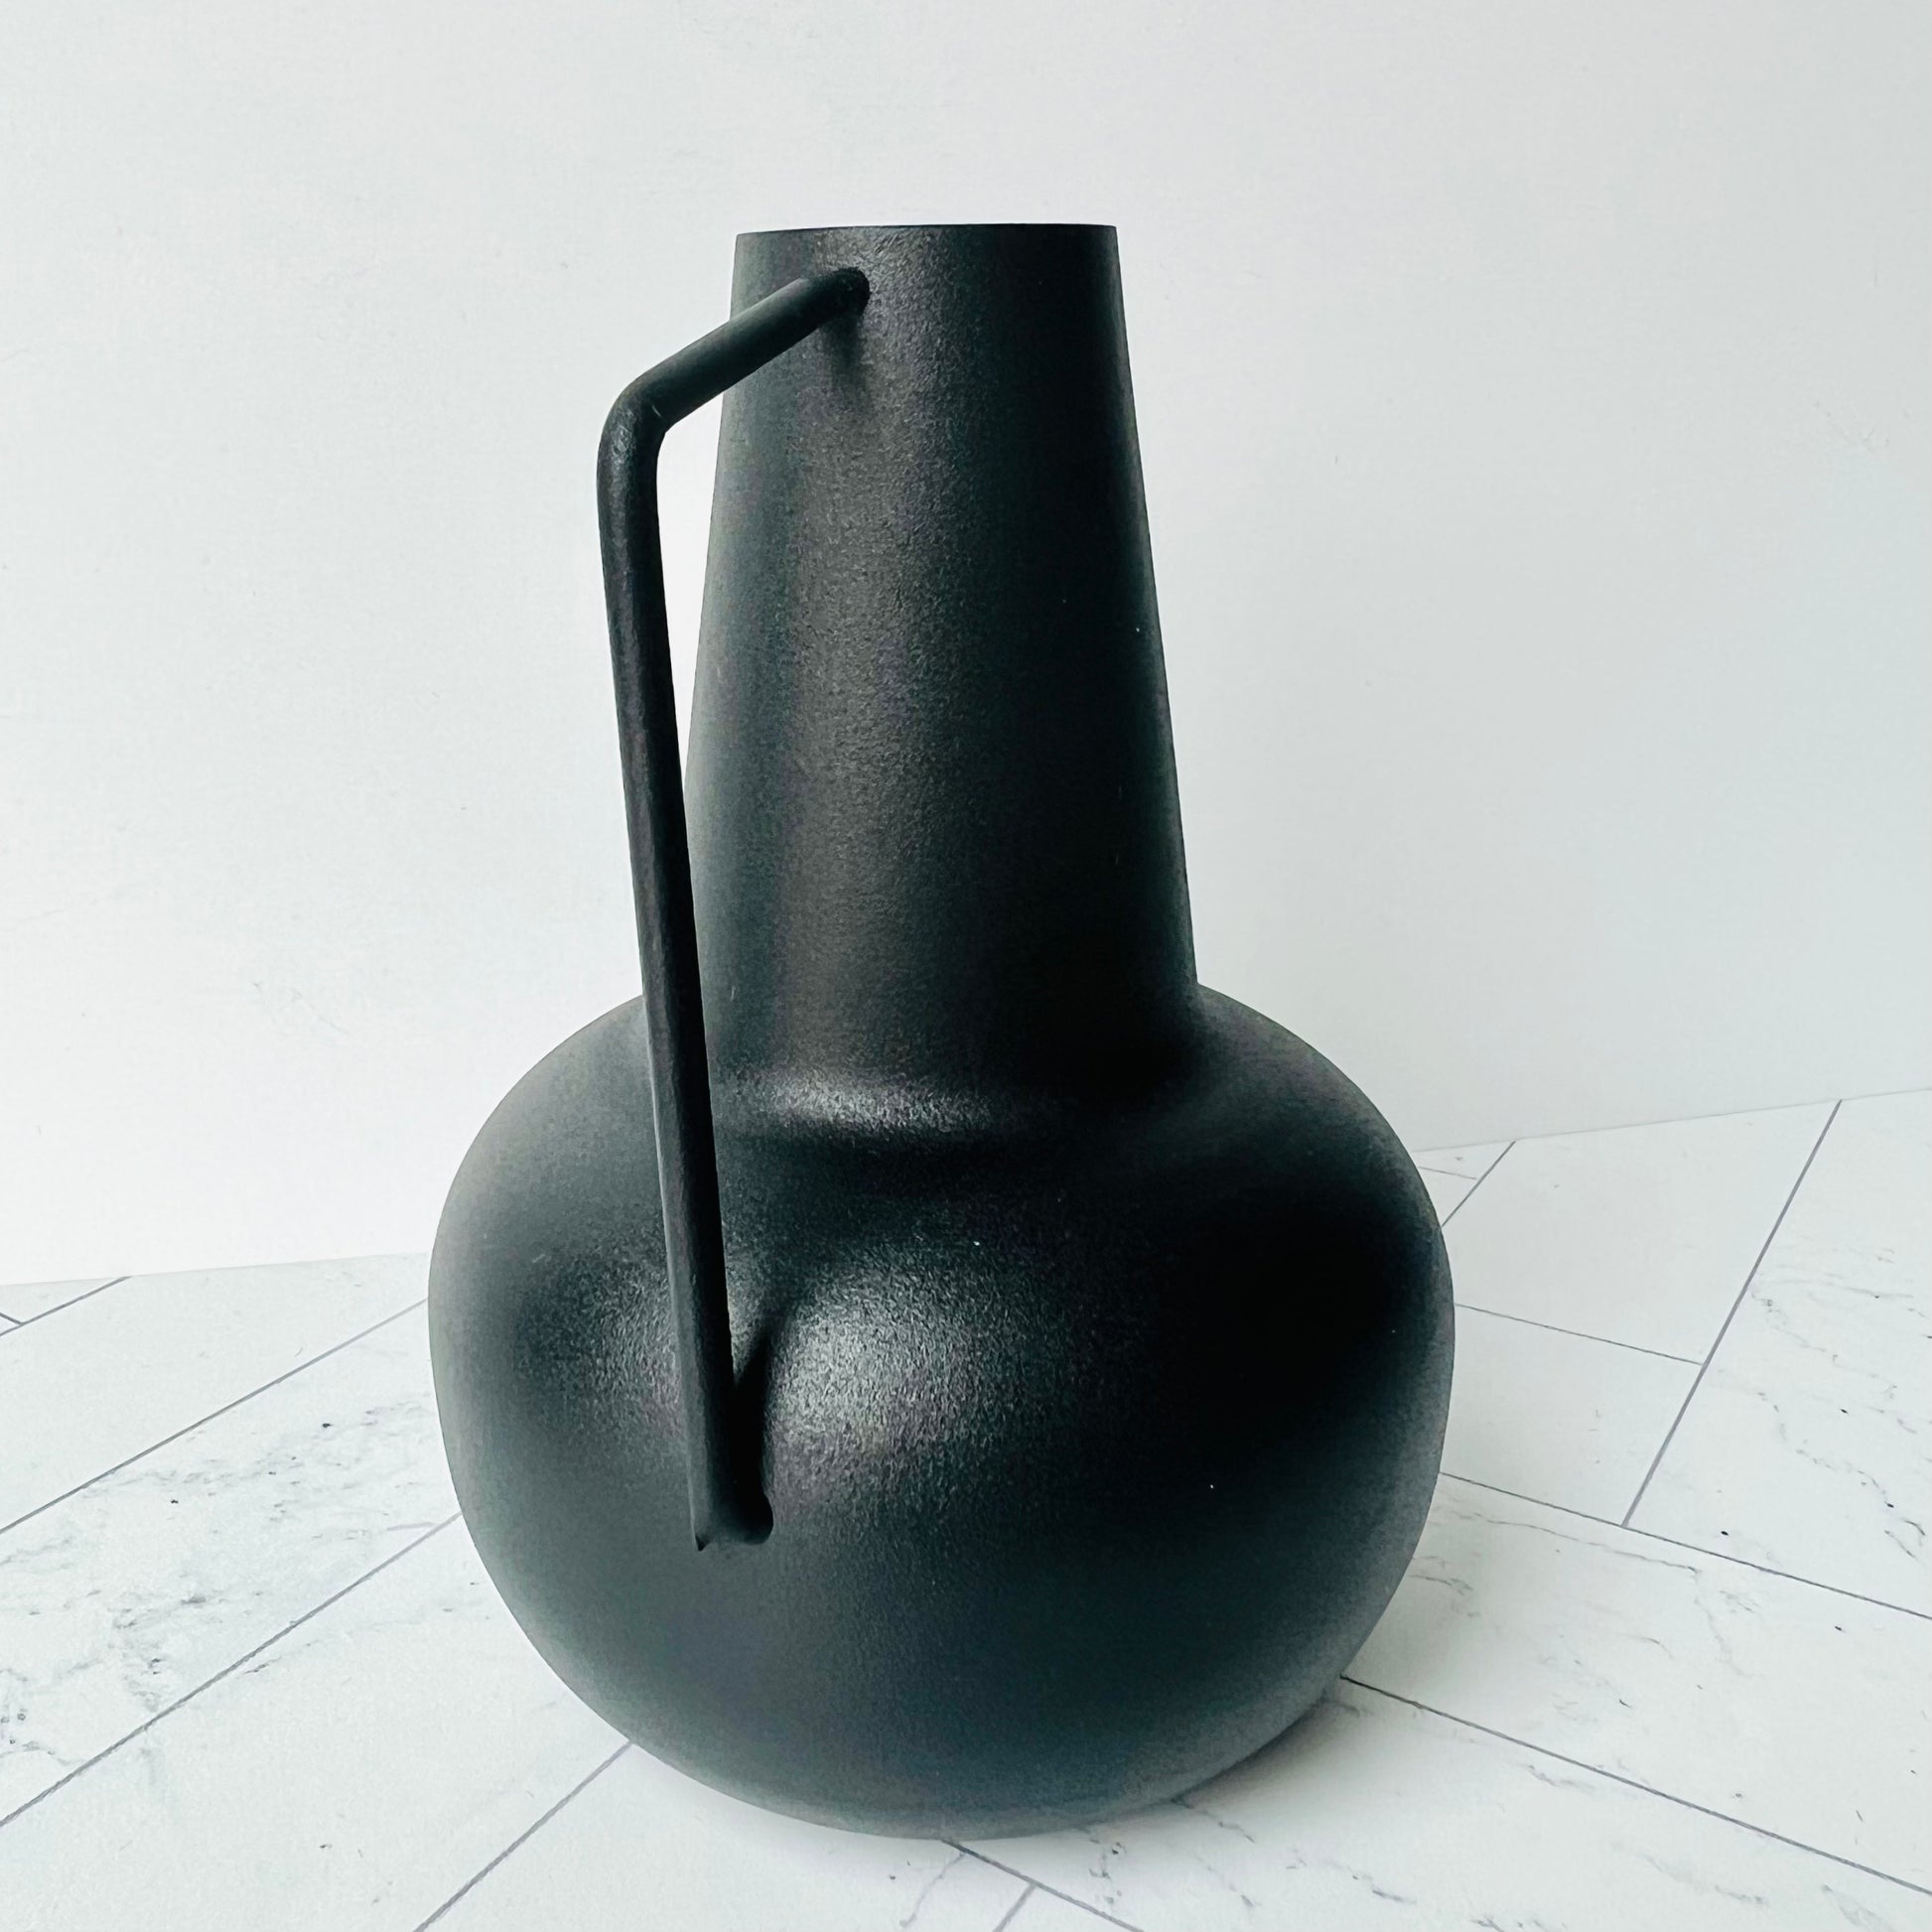 The Sleek Bud Vase on a light surface showing its handle and shape up close